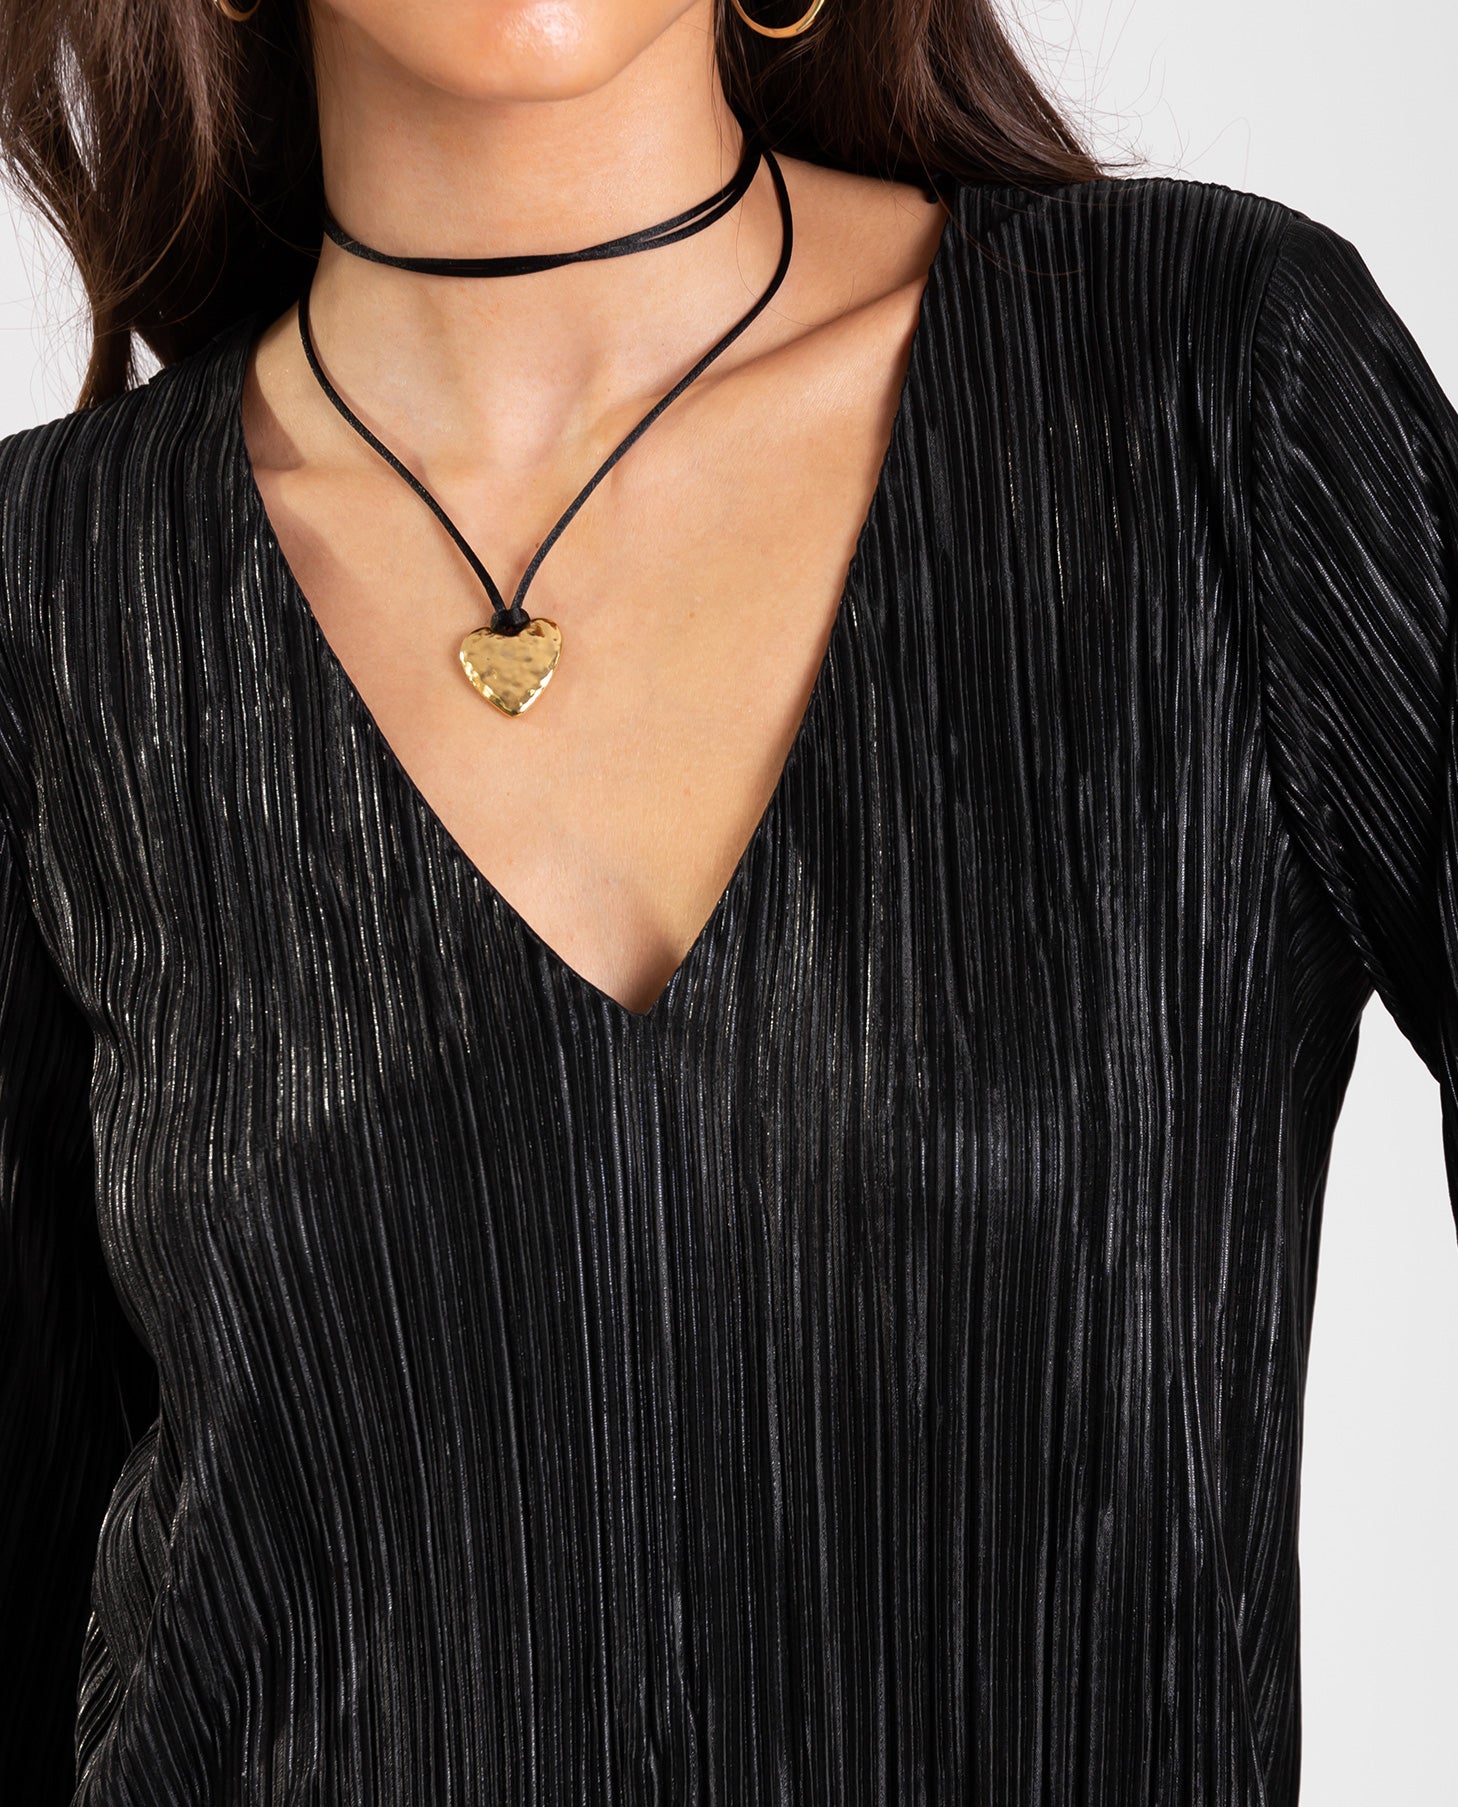 ENDLESS LOVE NECKLACE - GOLD PLATED